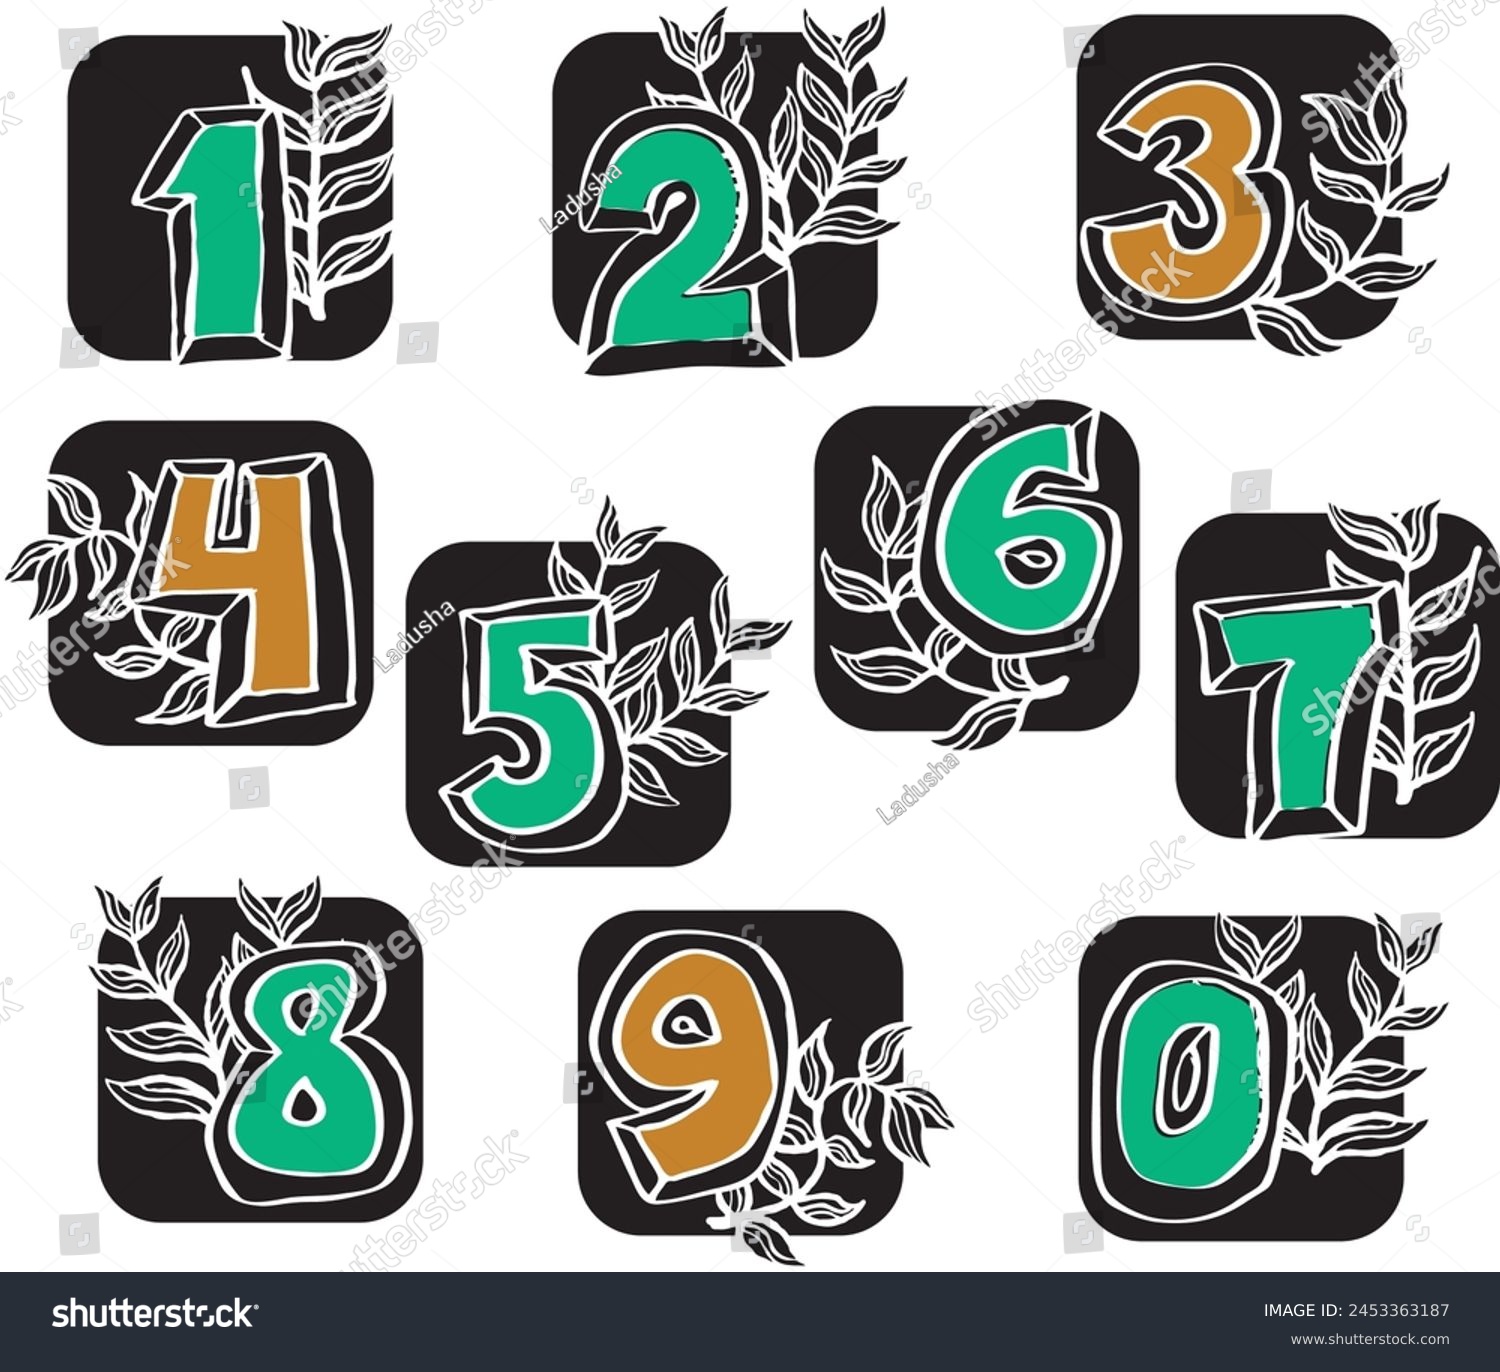 SVG of Numbers set for greeting cards, birthday or wedding invitation. Hand drawn illustration, cartoon style. 1234567890. Decorative vector element geometric or floral design. svg